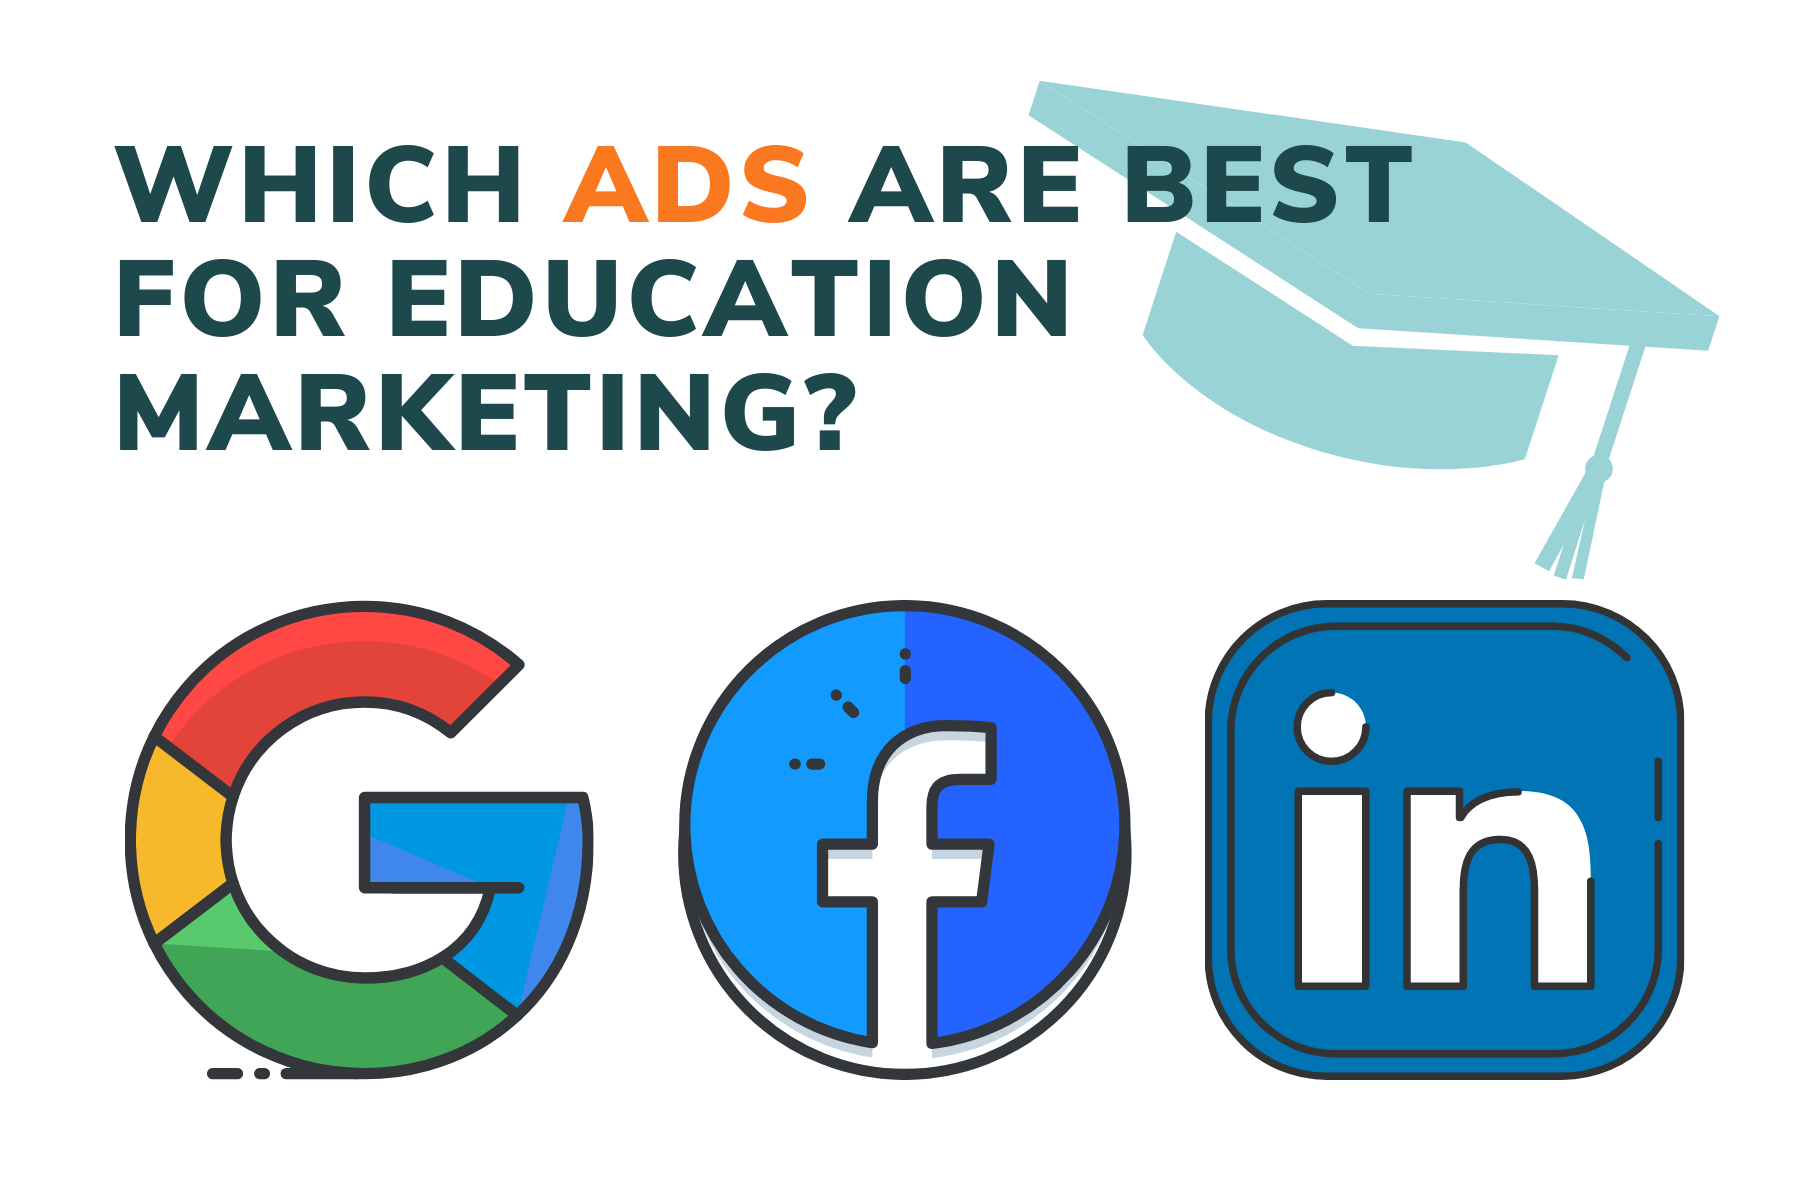 Which ads are best for education marketing?